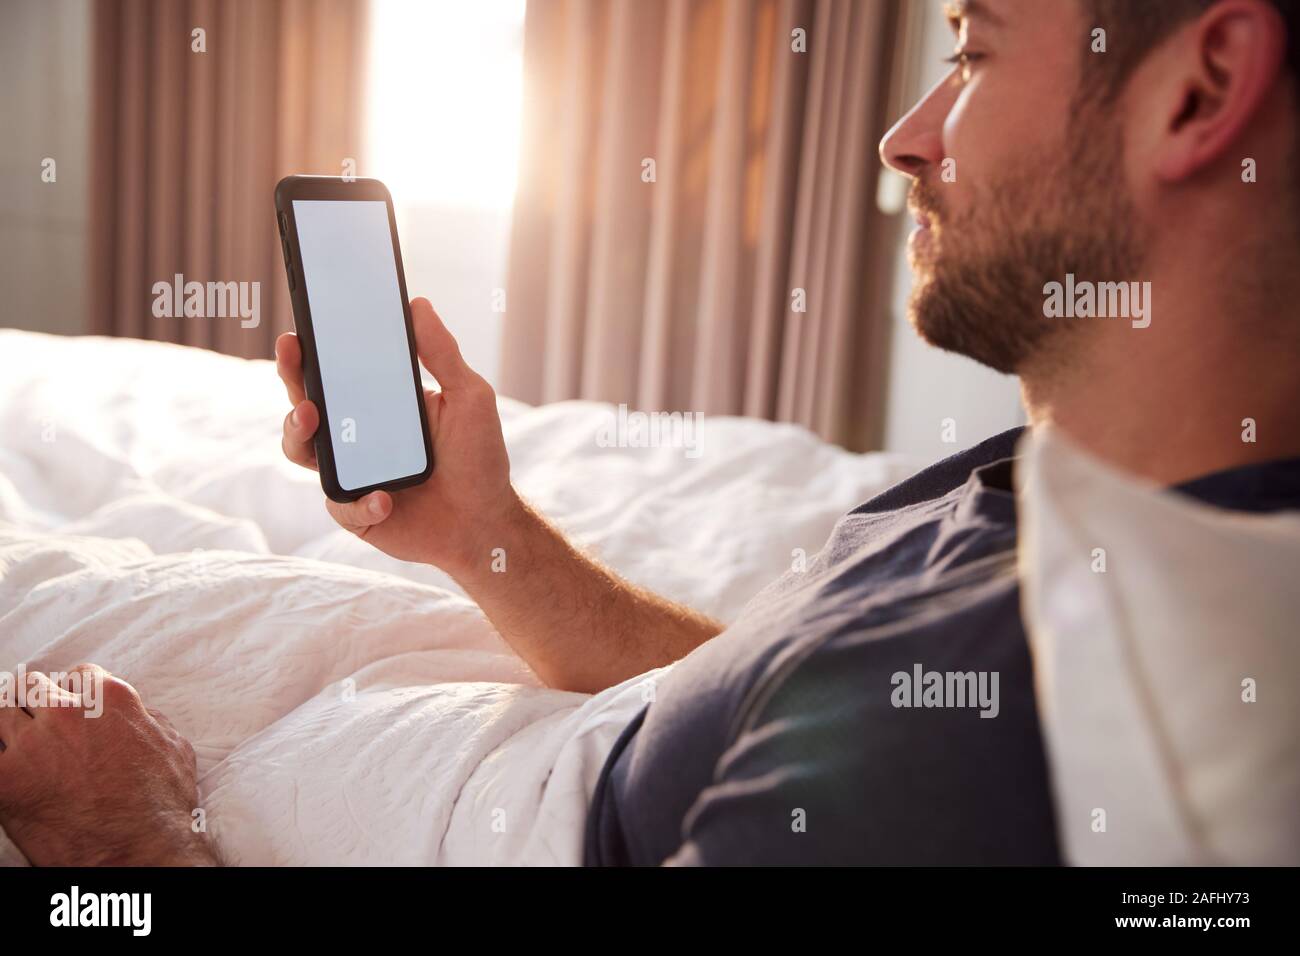 Man Sitting Up In Bed Looking At Mobile Phone After Having Woken Up Stock Photo